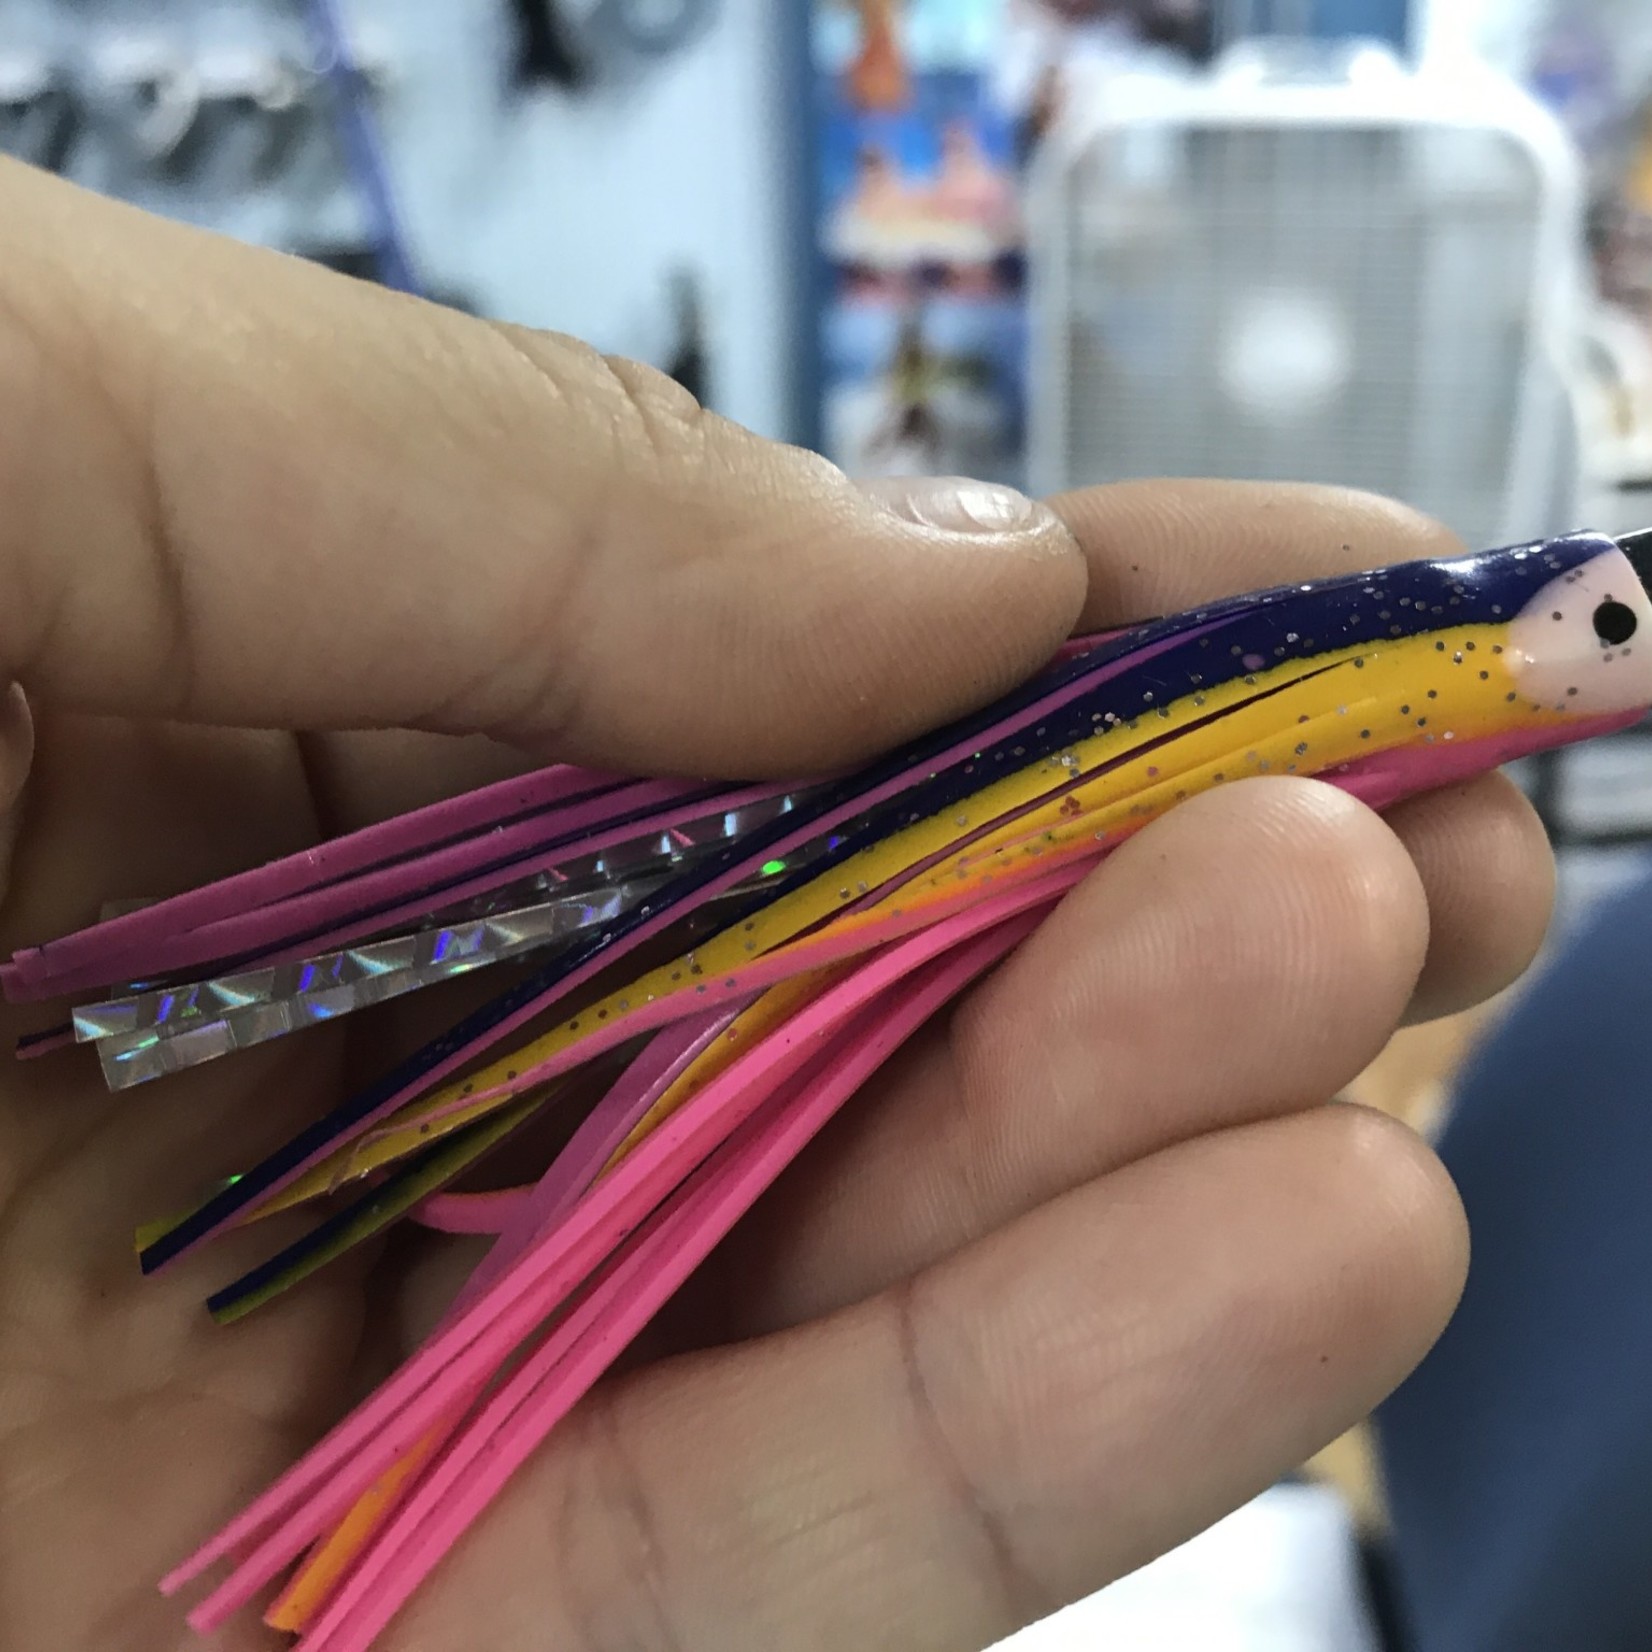 Tailchaser Lures - Micro Jets